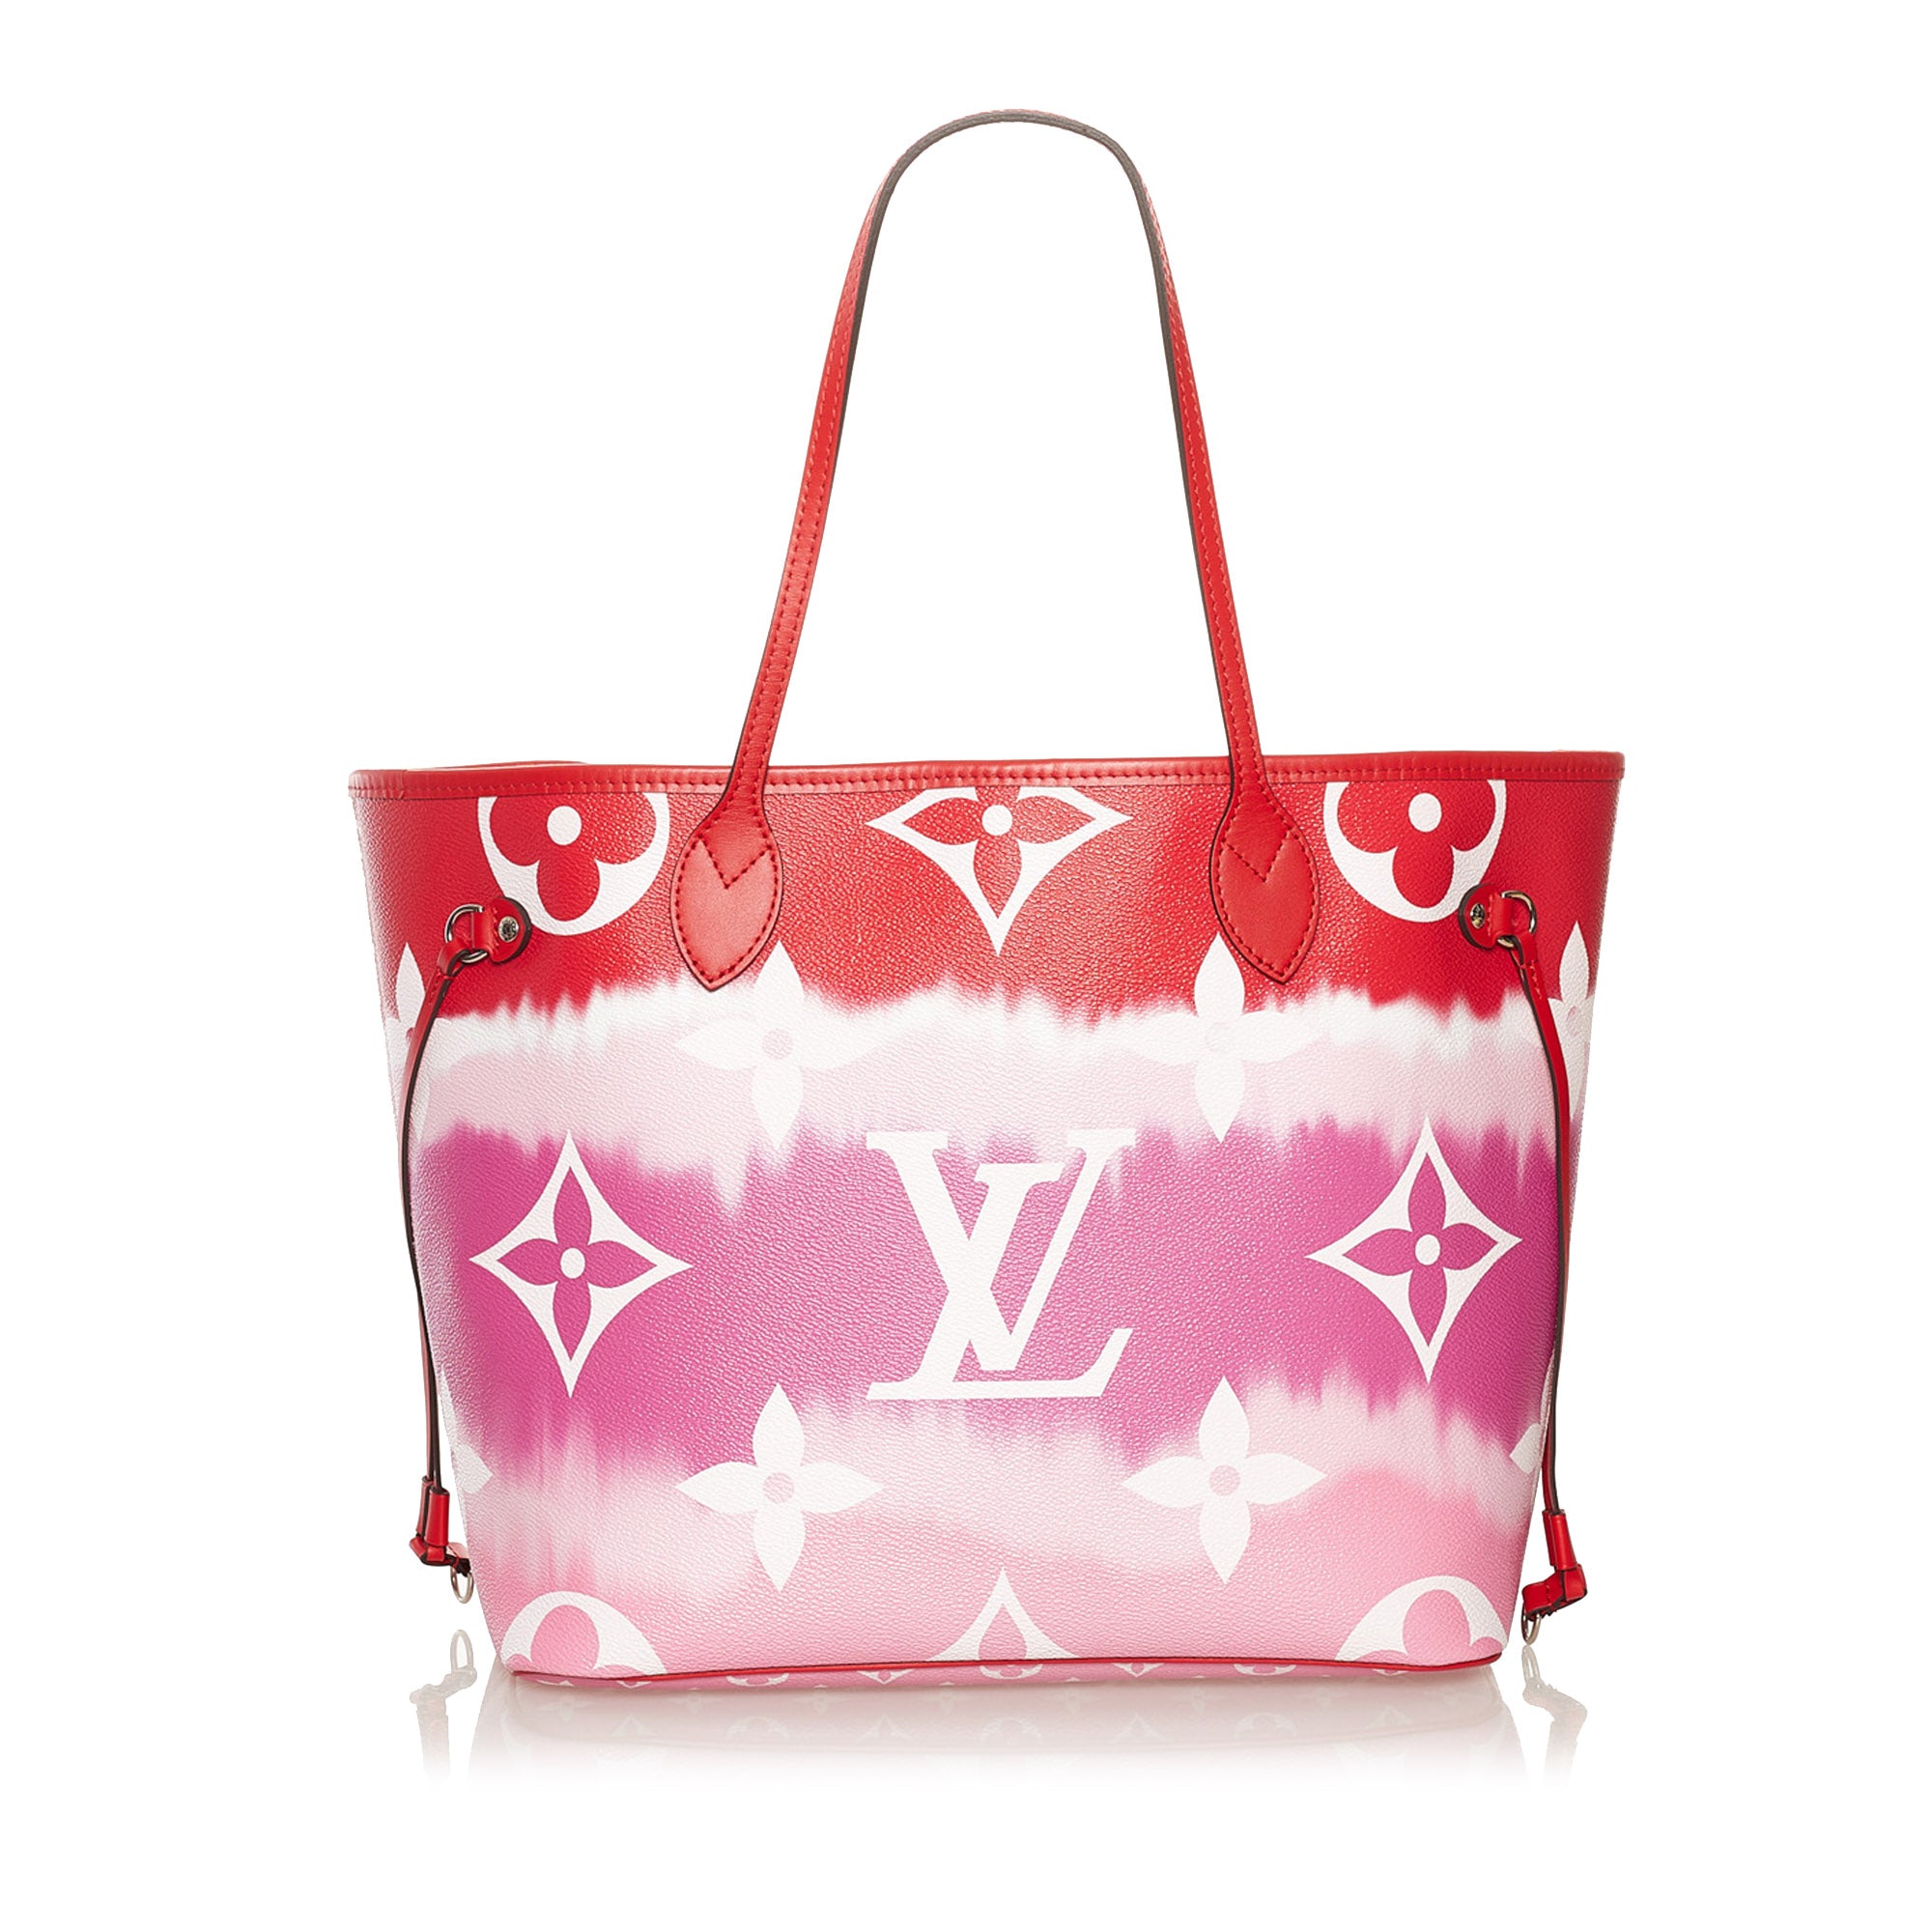 louis vuitton bag pink and white